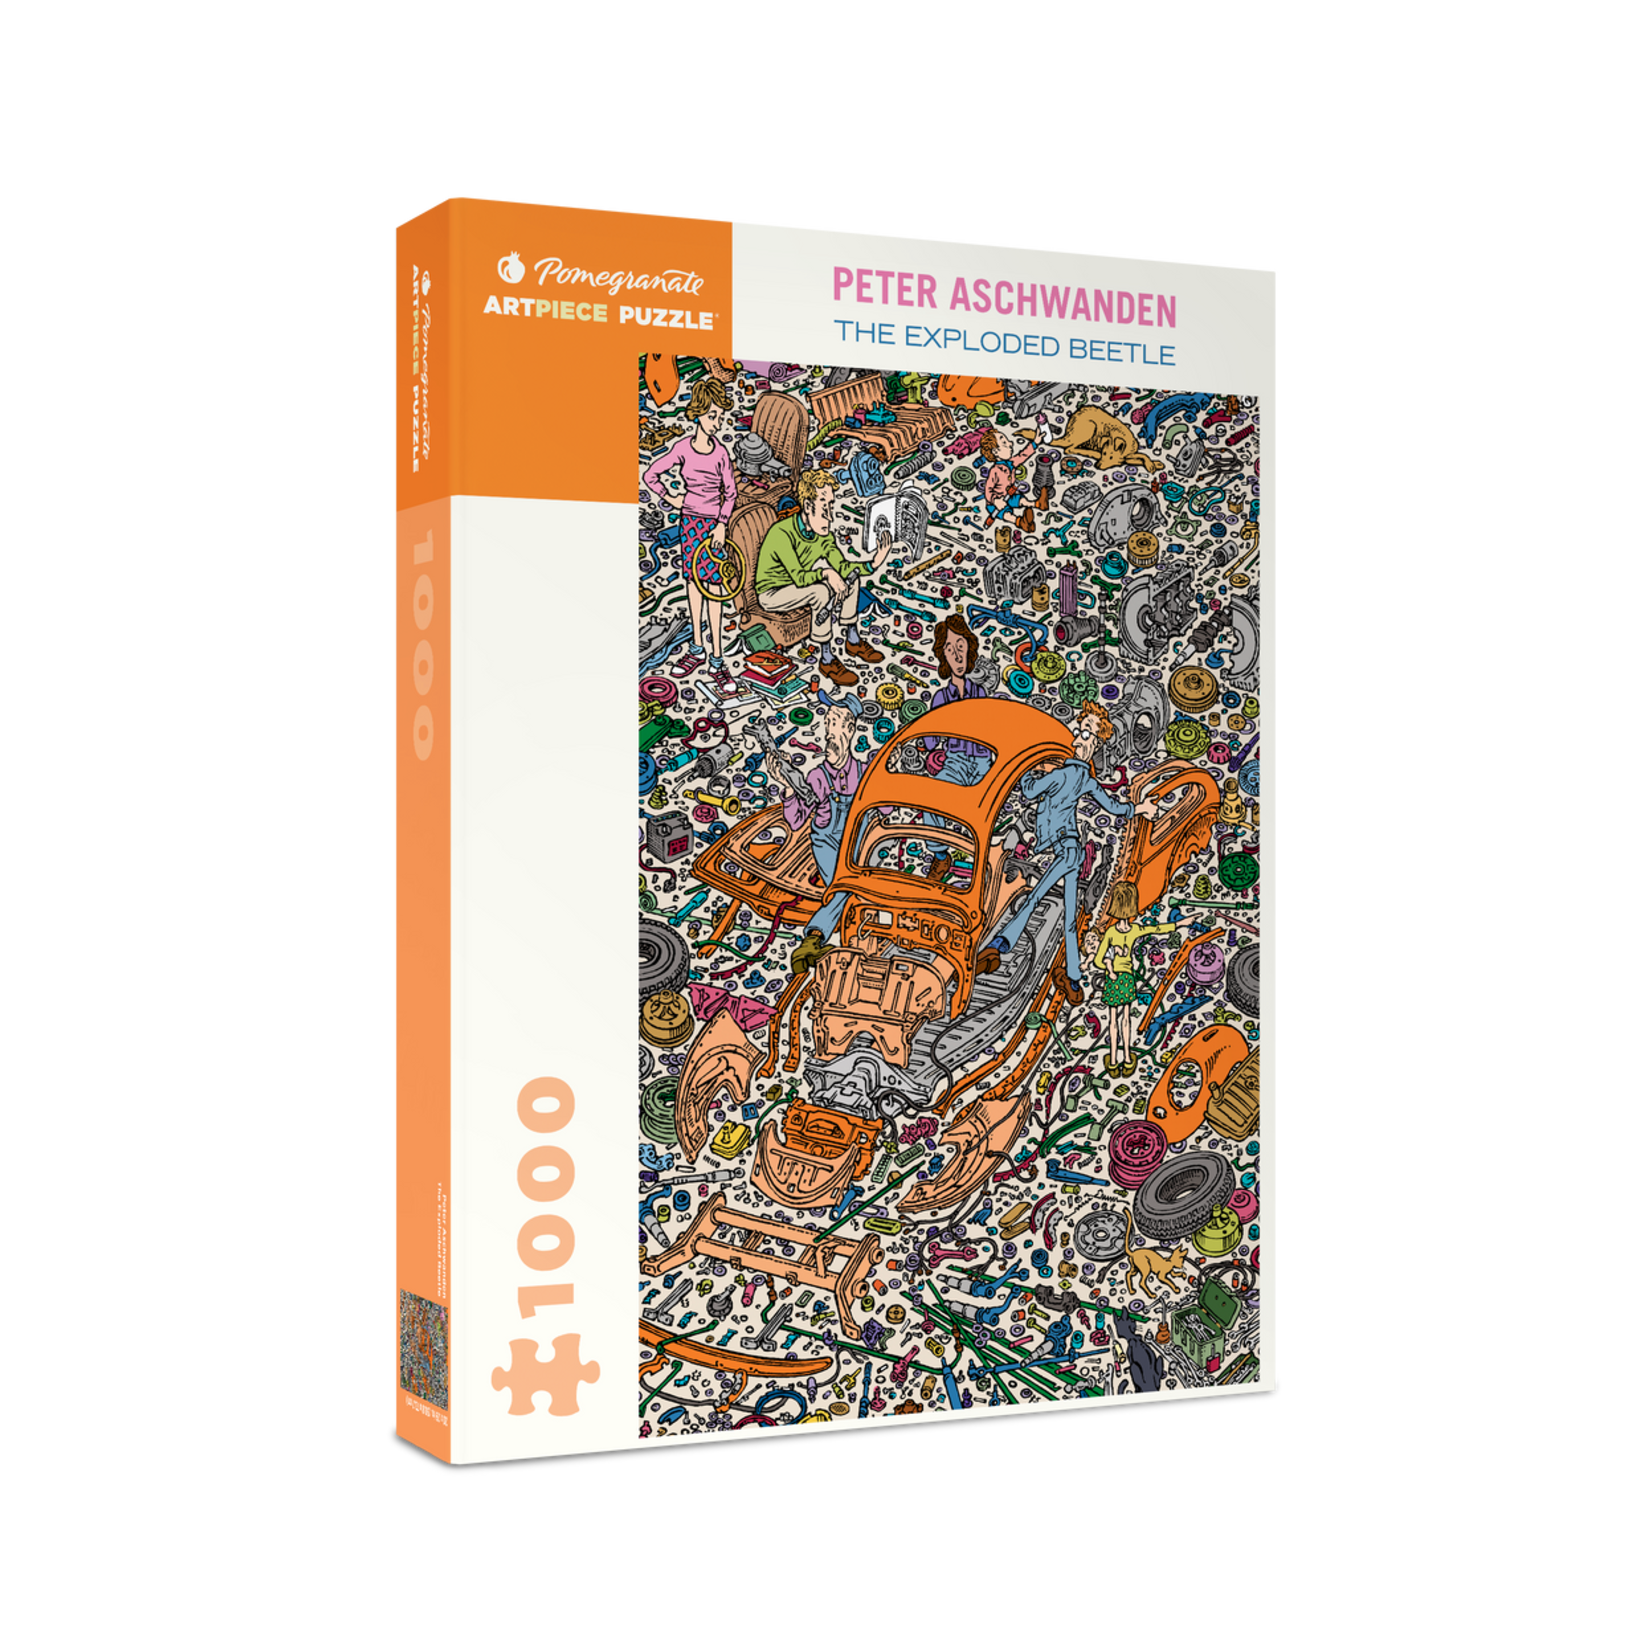 Peter Aschwanden The Exploded Beetle 1000 Piece Jigsaw Puzzle